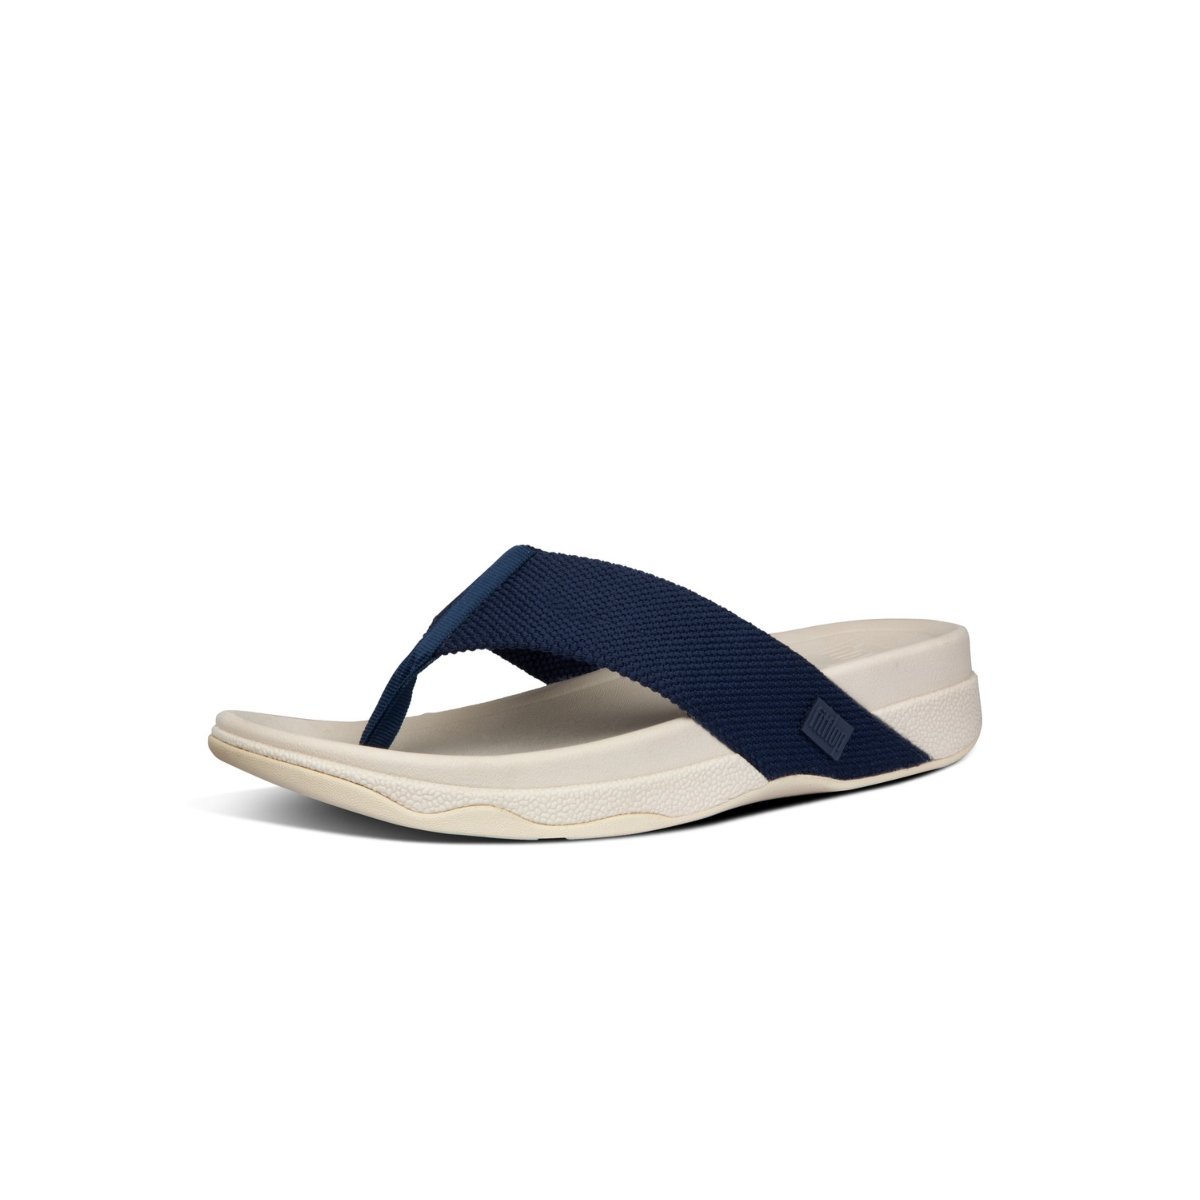 FitFlop SURFER Toe-Post Sandals Midnight Navy/White side view